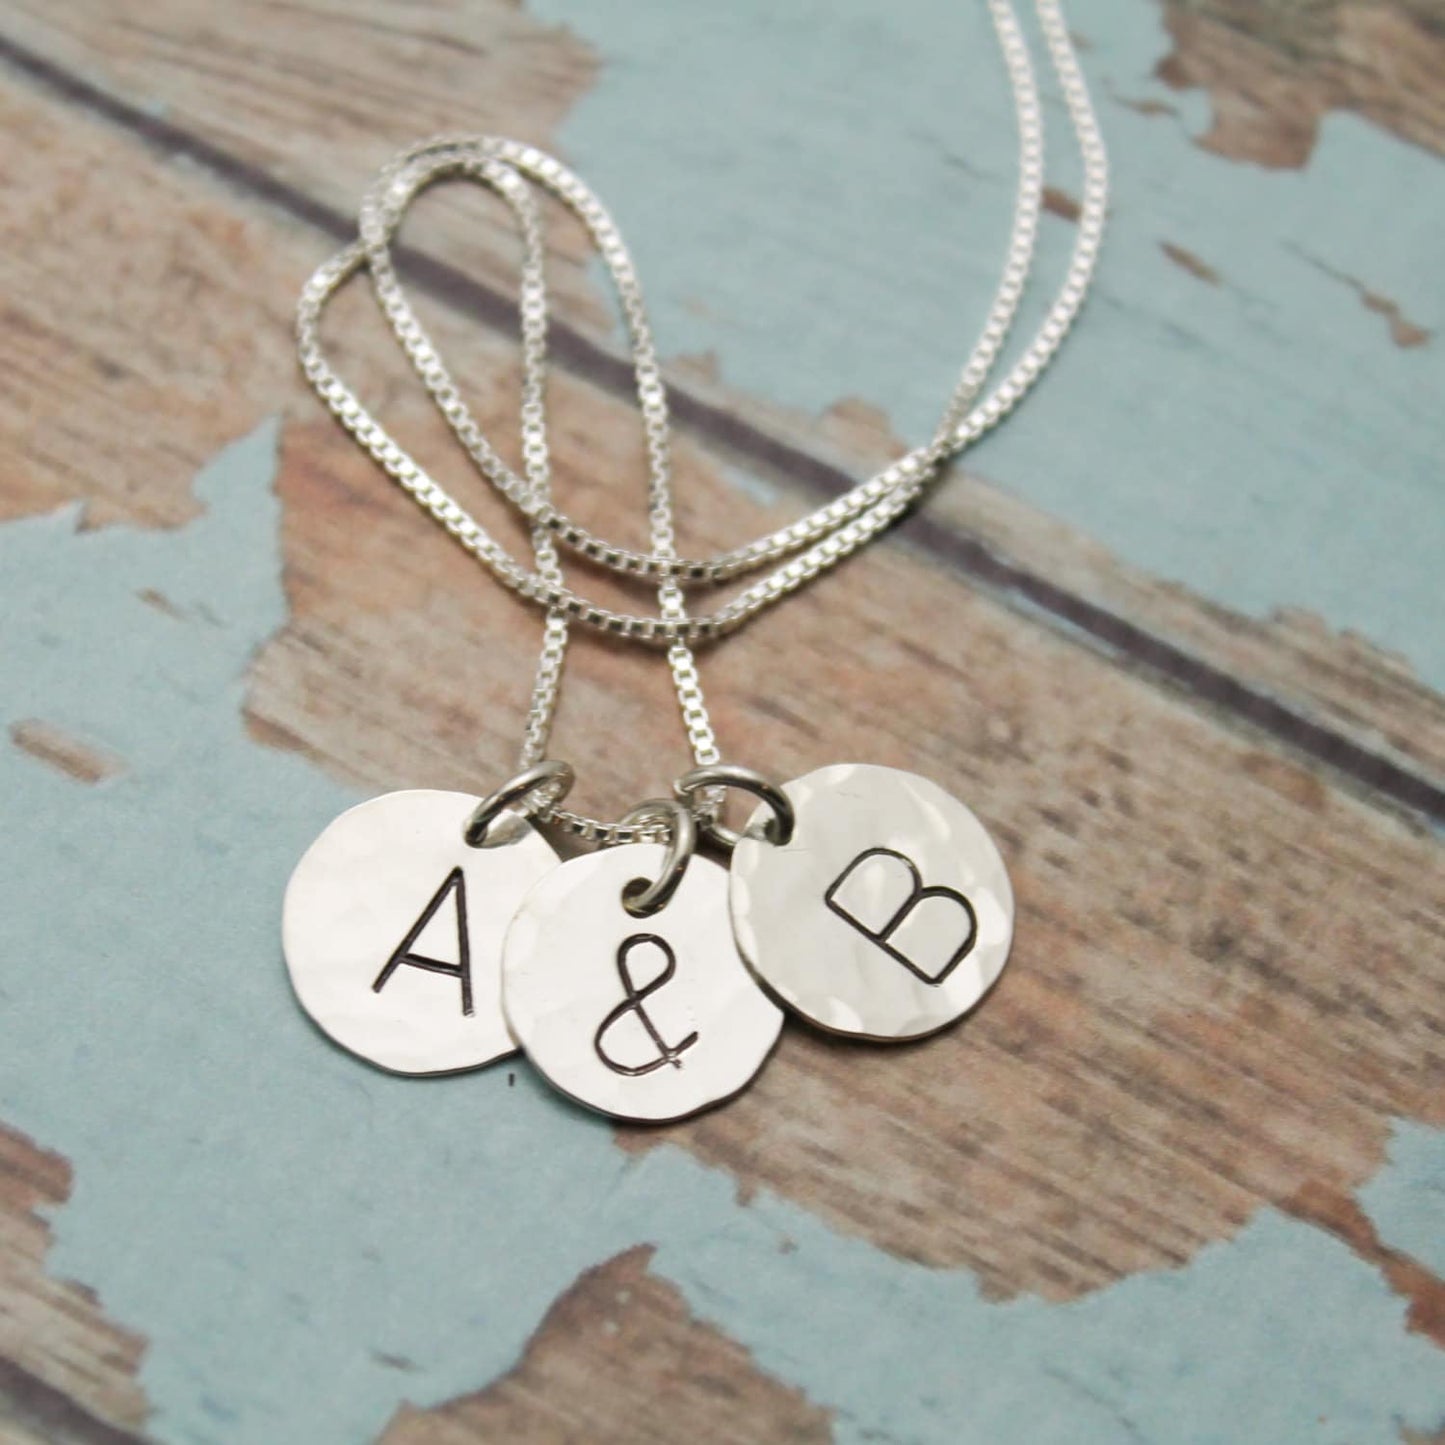 Sterling Silver Initial Necklace, Minimalist Initial Necklace, Minimalist Jewelry, Simple Necklace, Customized, Personalized Hand Stamped